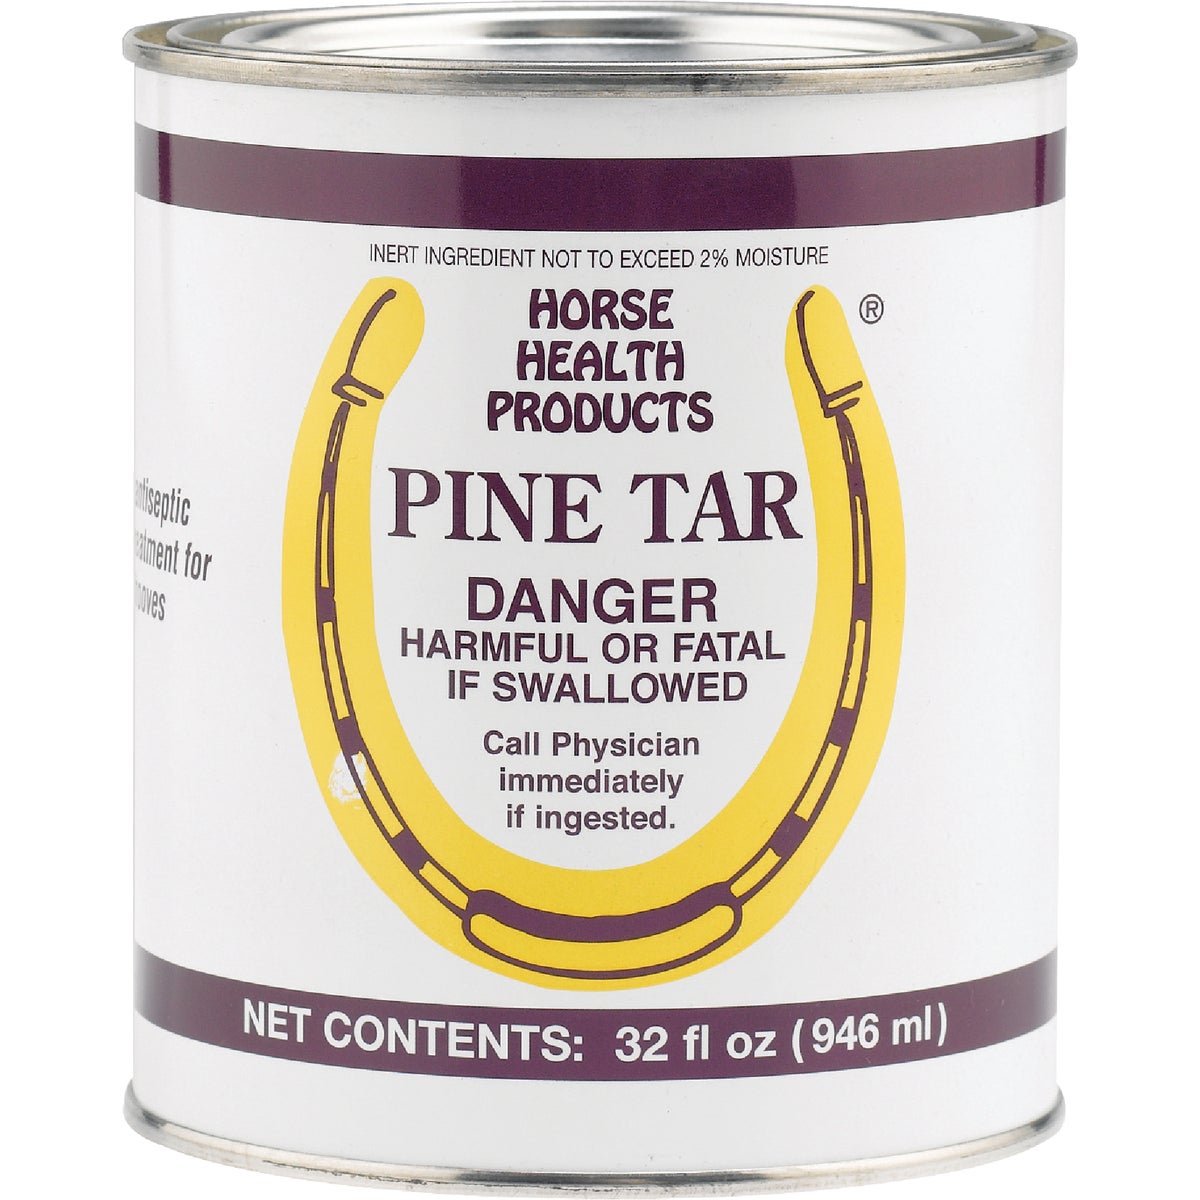 Item 710403, A natural antiseptic, germicidal treatment for use on hooves.